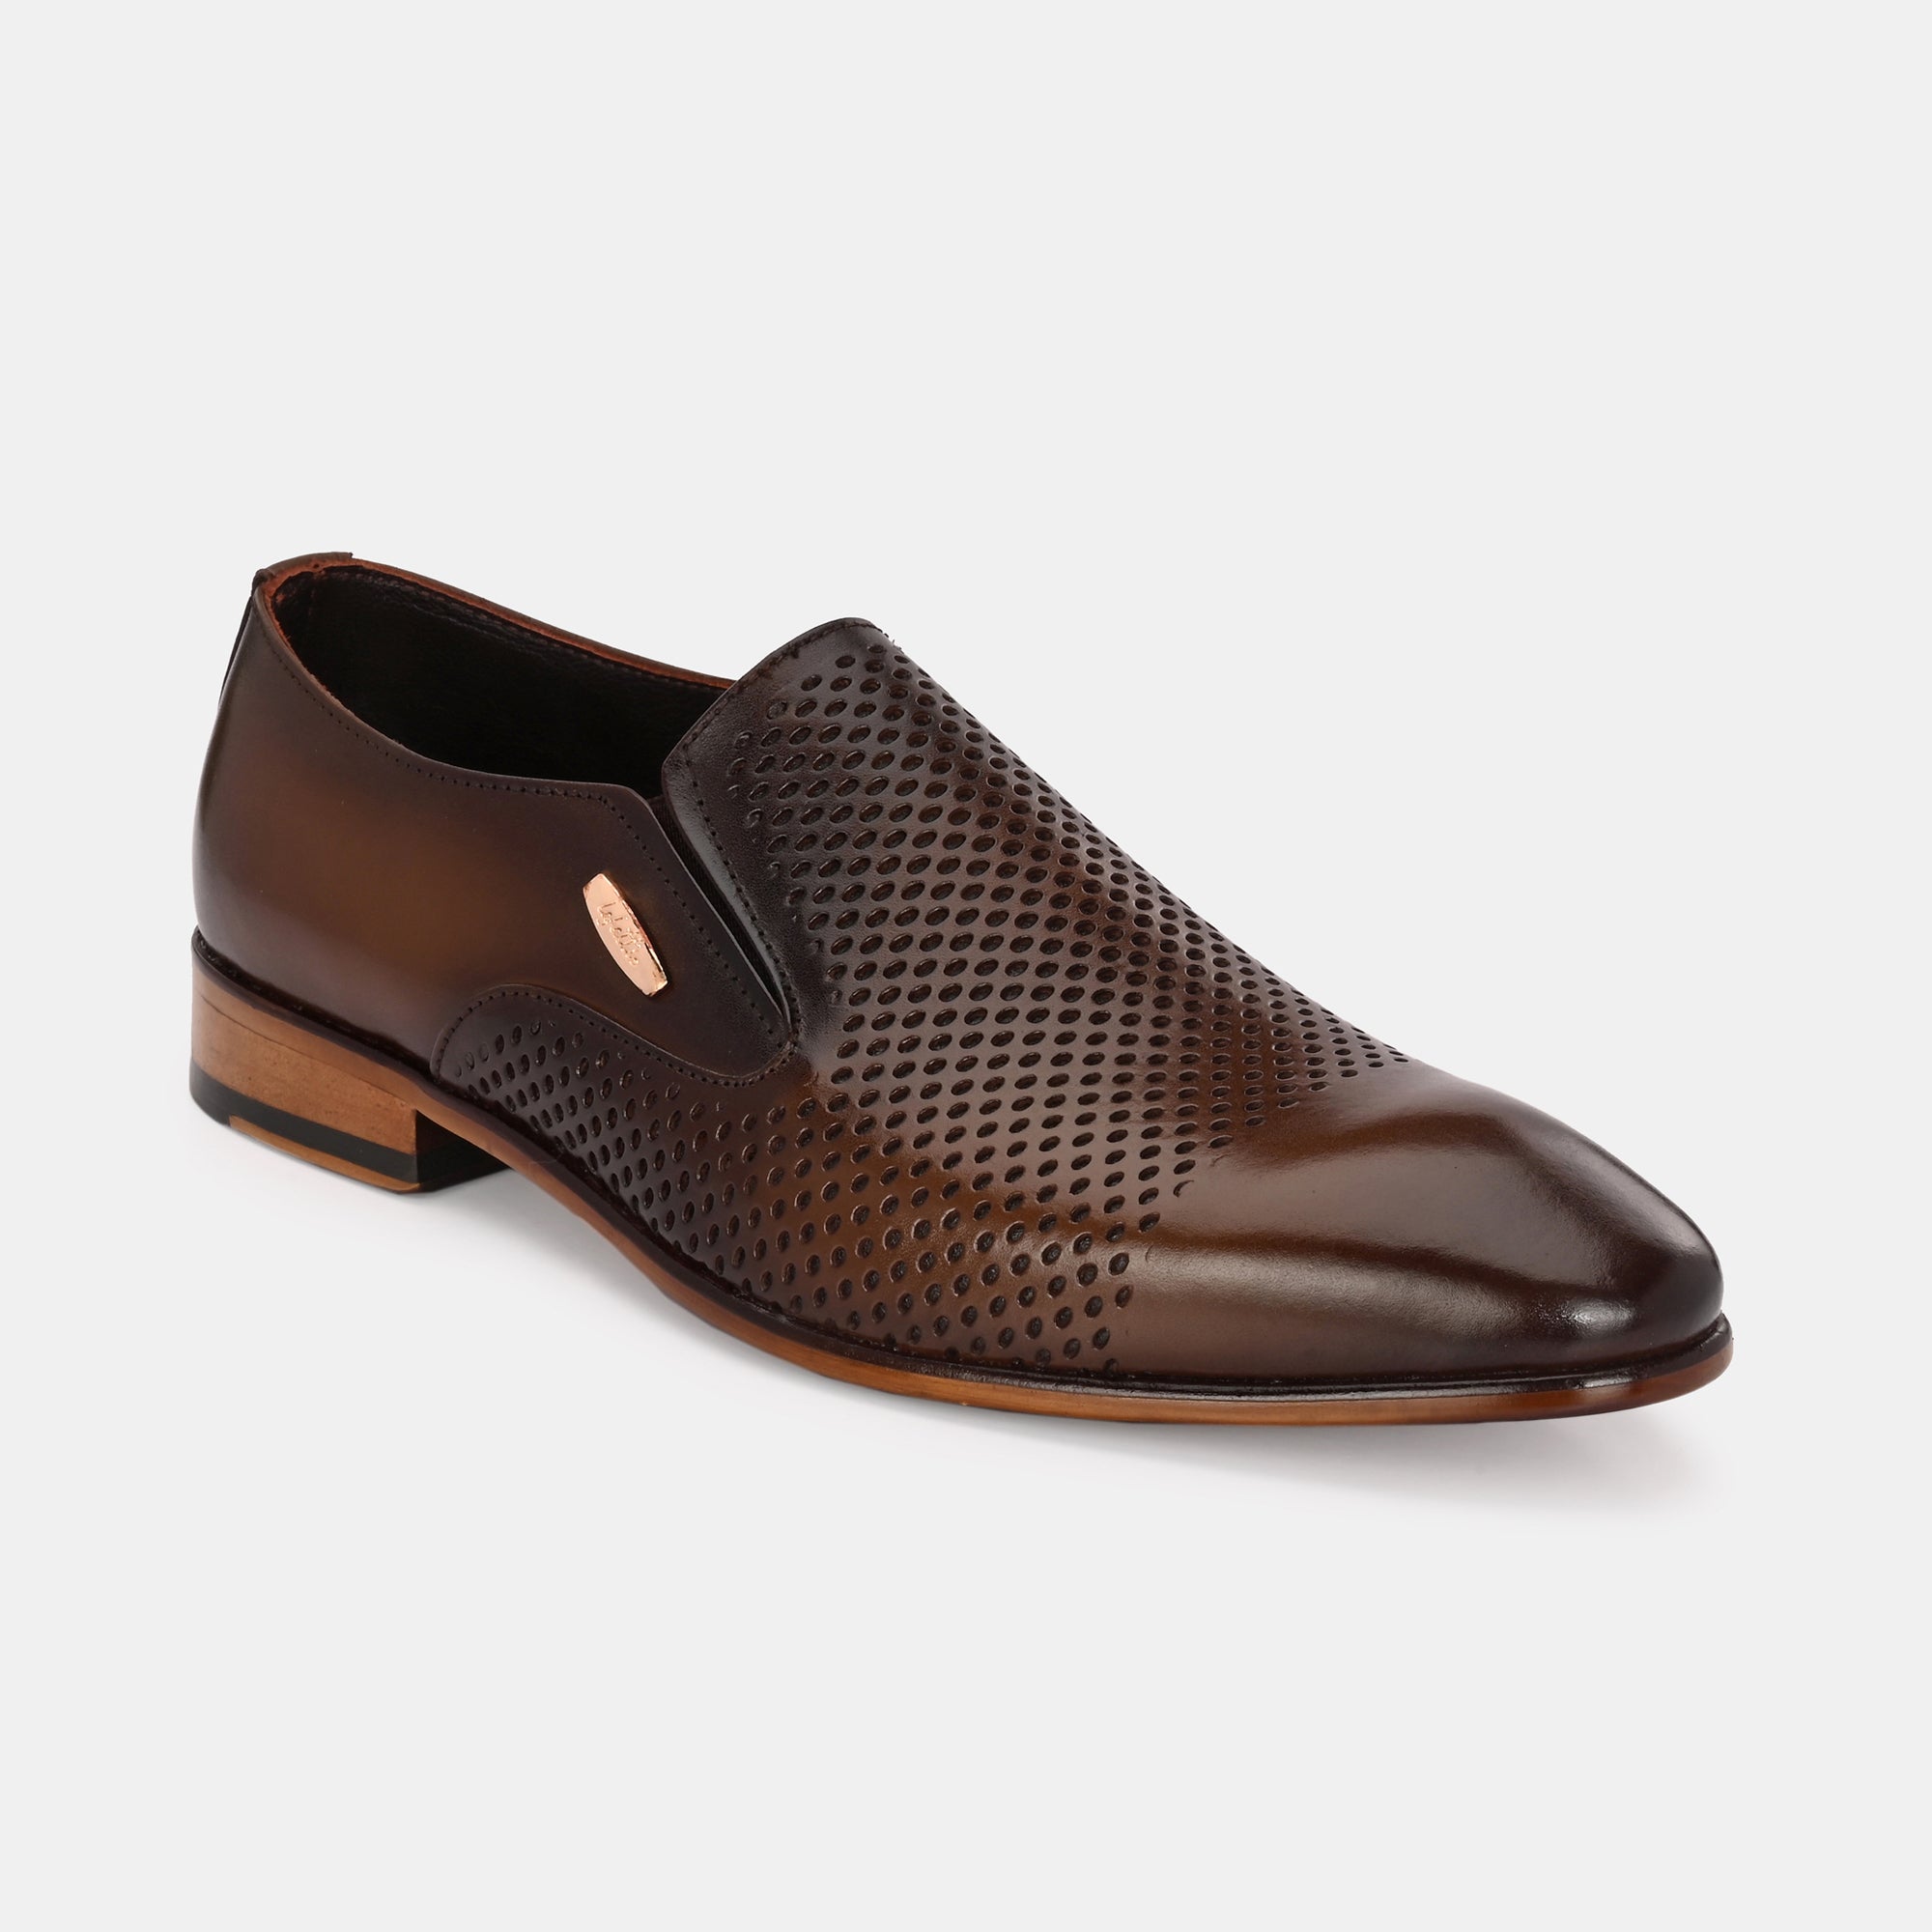 Brown Perforated Moccasins by Lafattio